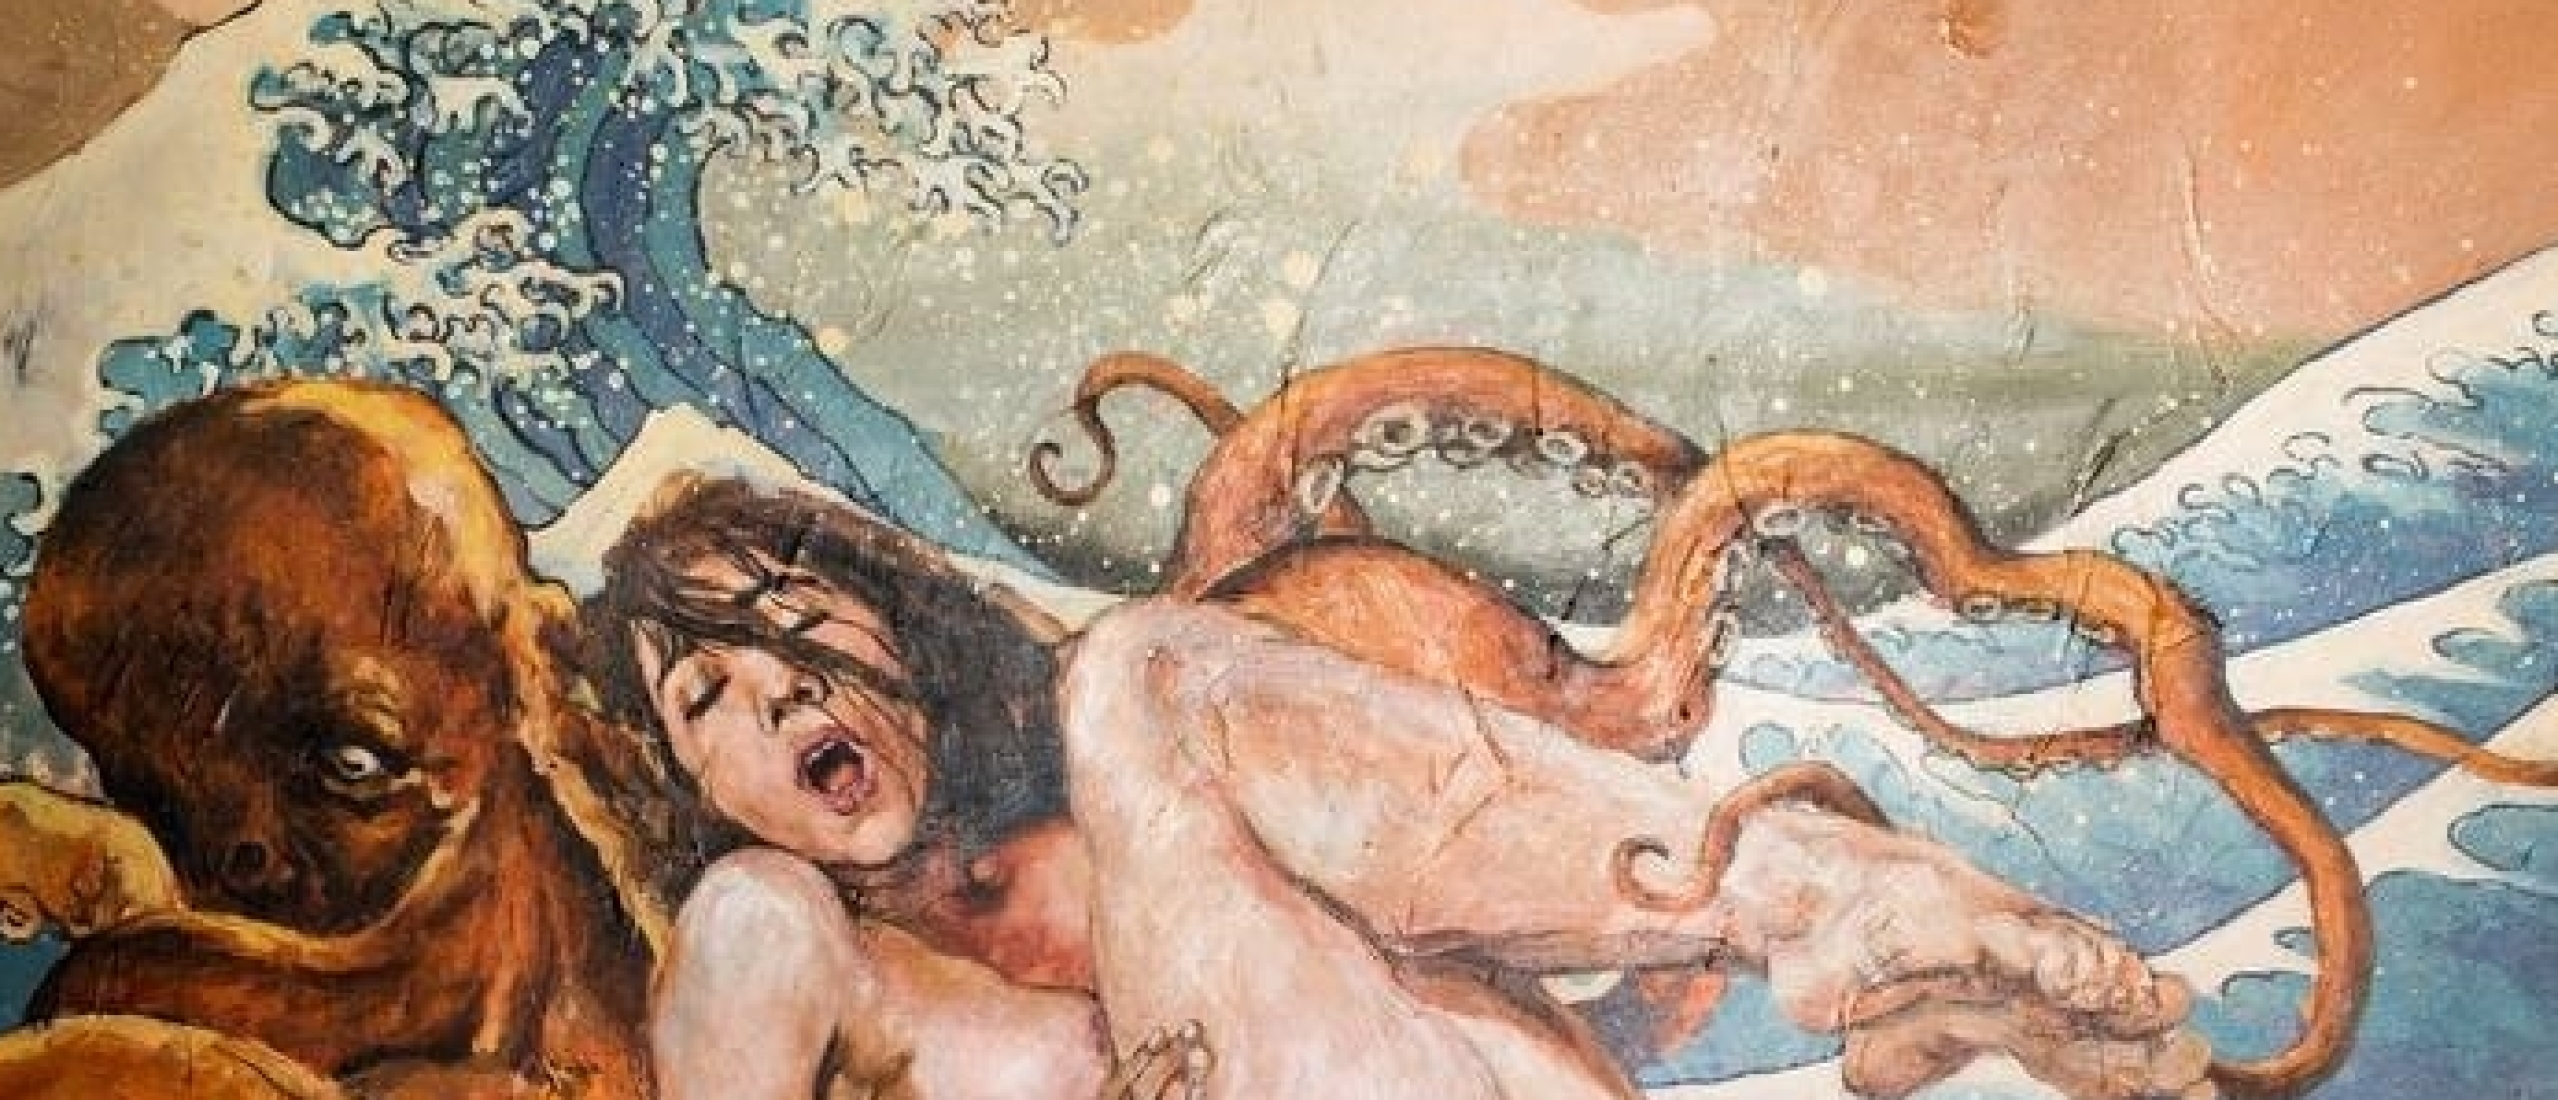 Obsessed With Hokusai: The Octopussy series By Vietnamese Artist Trần Trung Lĩnh